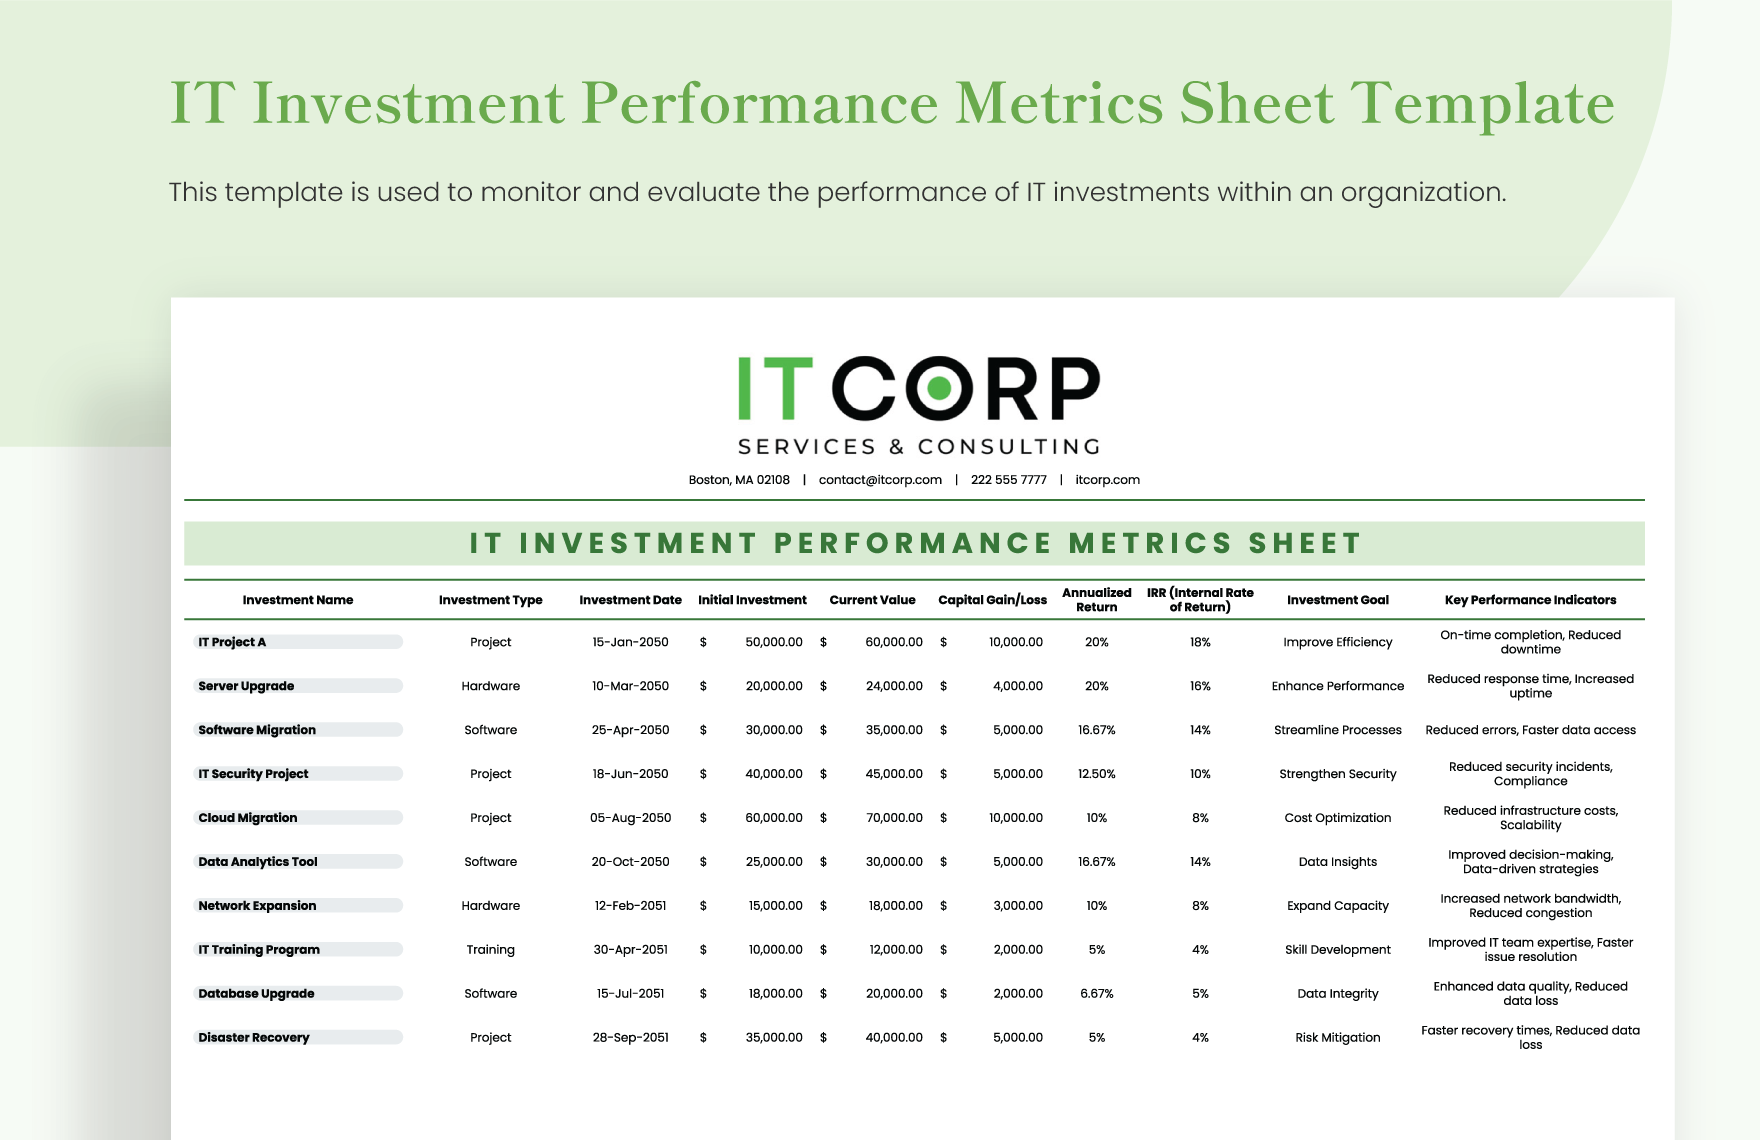 IT Investment Performance Metrics Sheet Template in Excel, Google Sheets